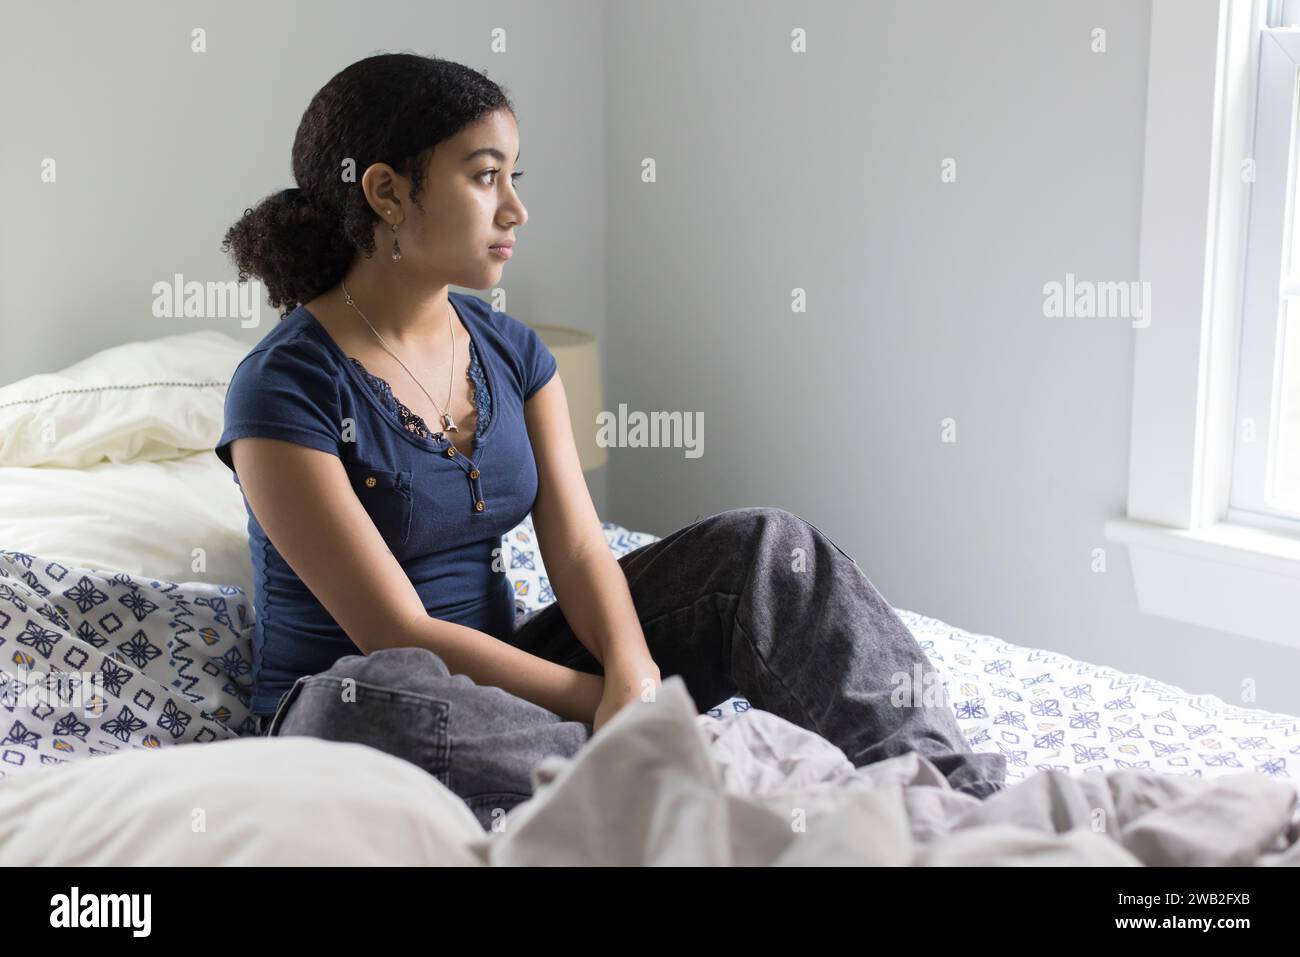 Biracial teen girl sits on un unmade bed looking depressed Stock Photo